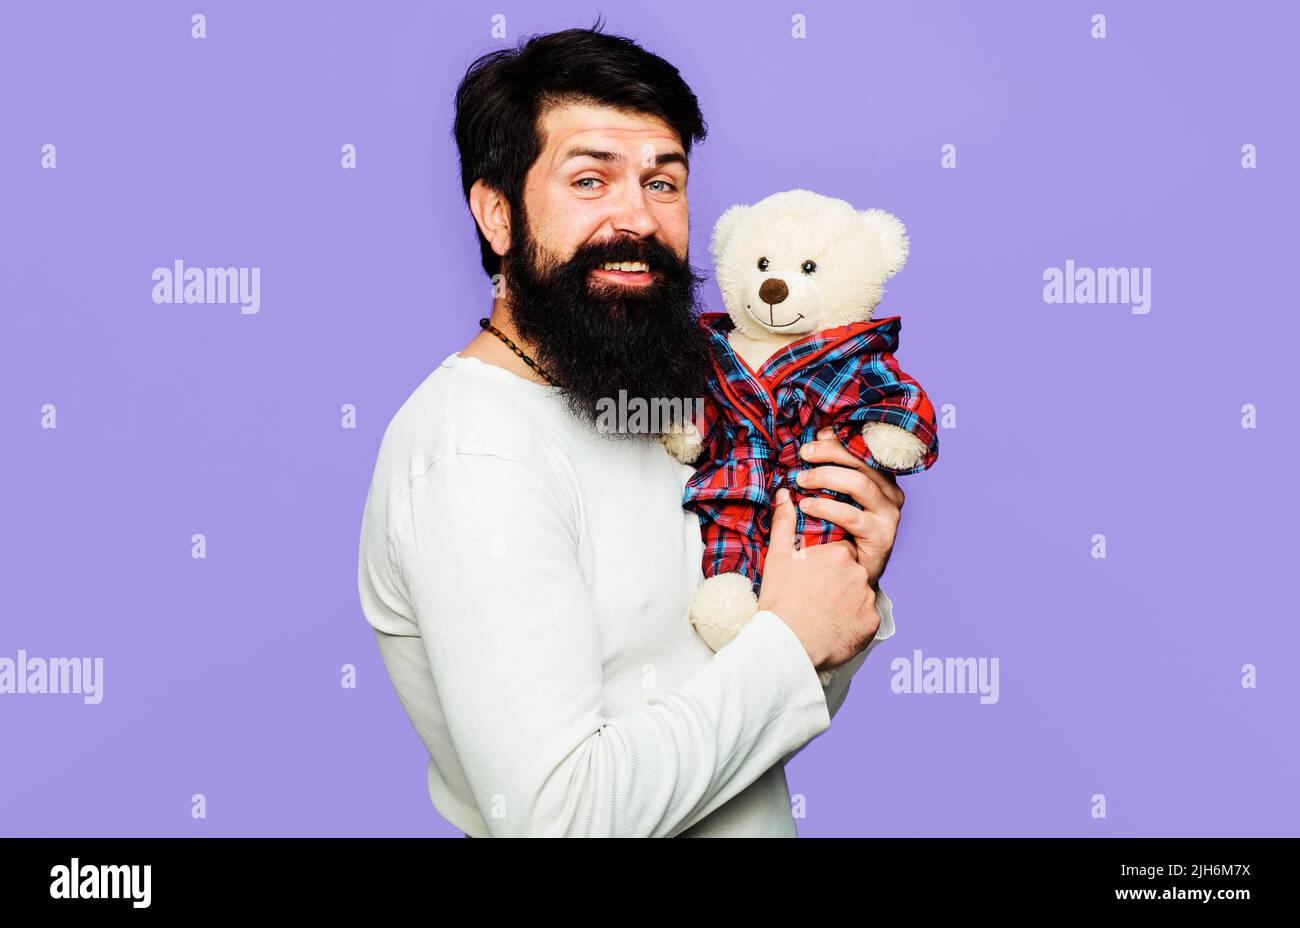 Smiling man with plush toy. Present for birthday. Bearded guy with teddy bear. Anniversary, holiday. Stock Photo